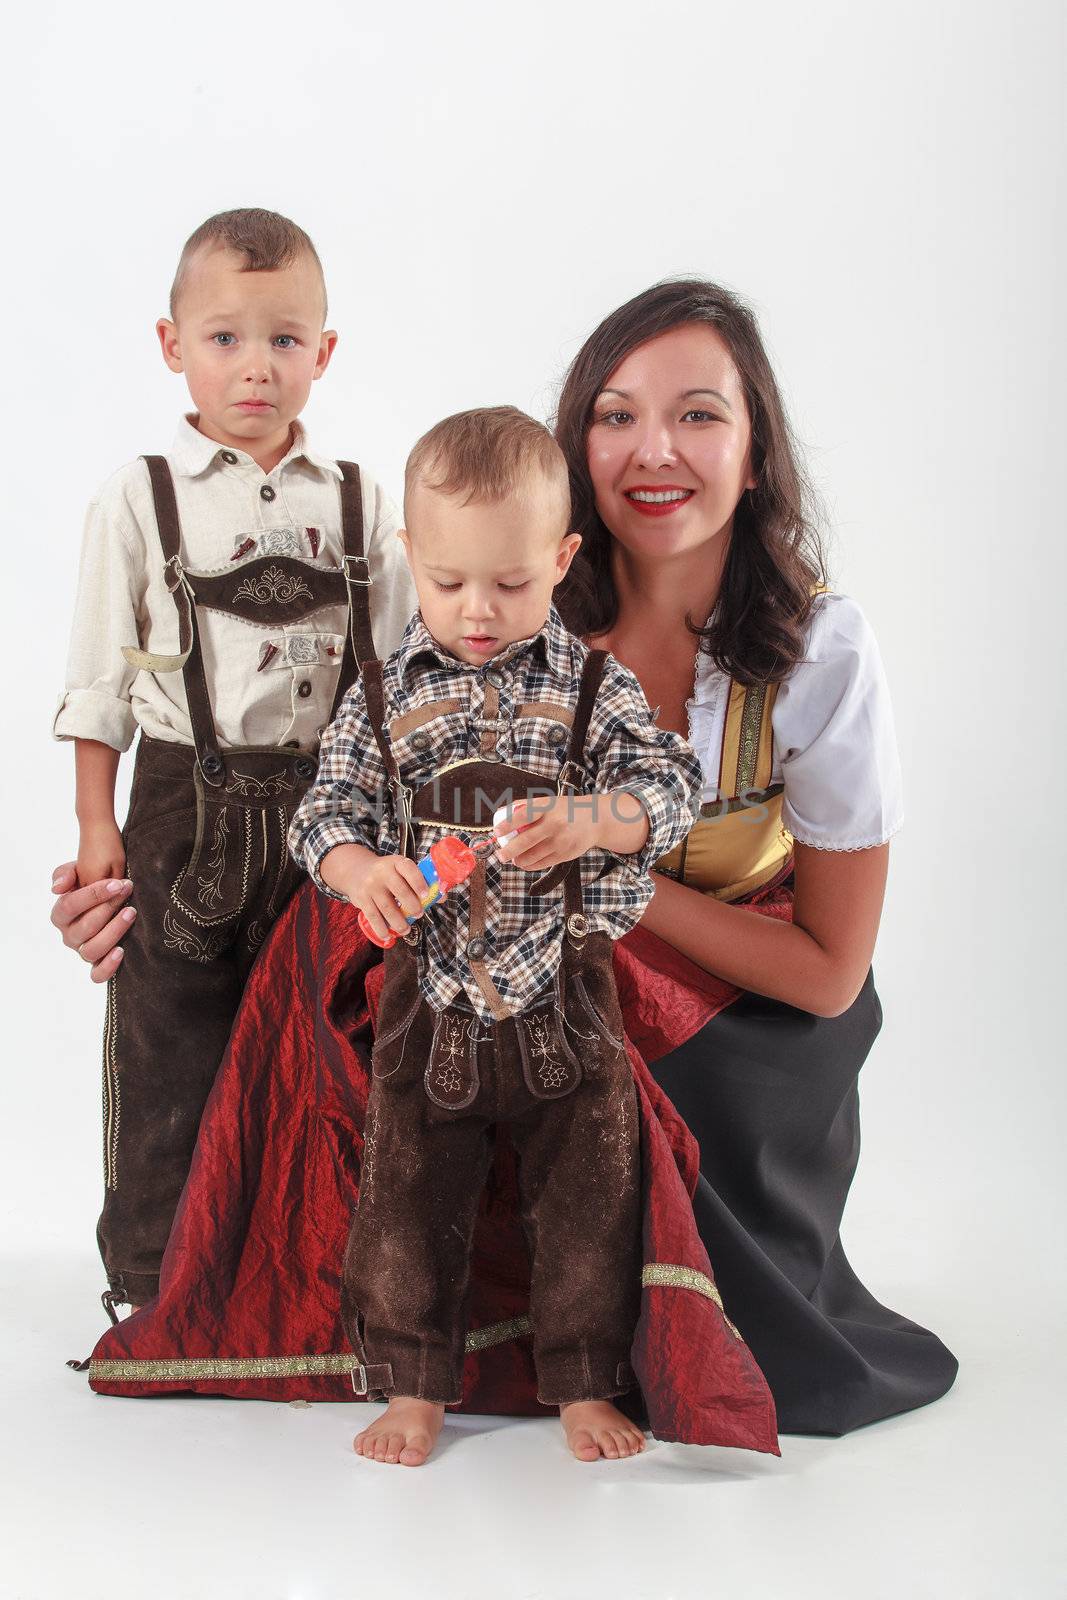 Your mother with two boys in Bavarian costume